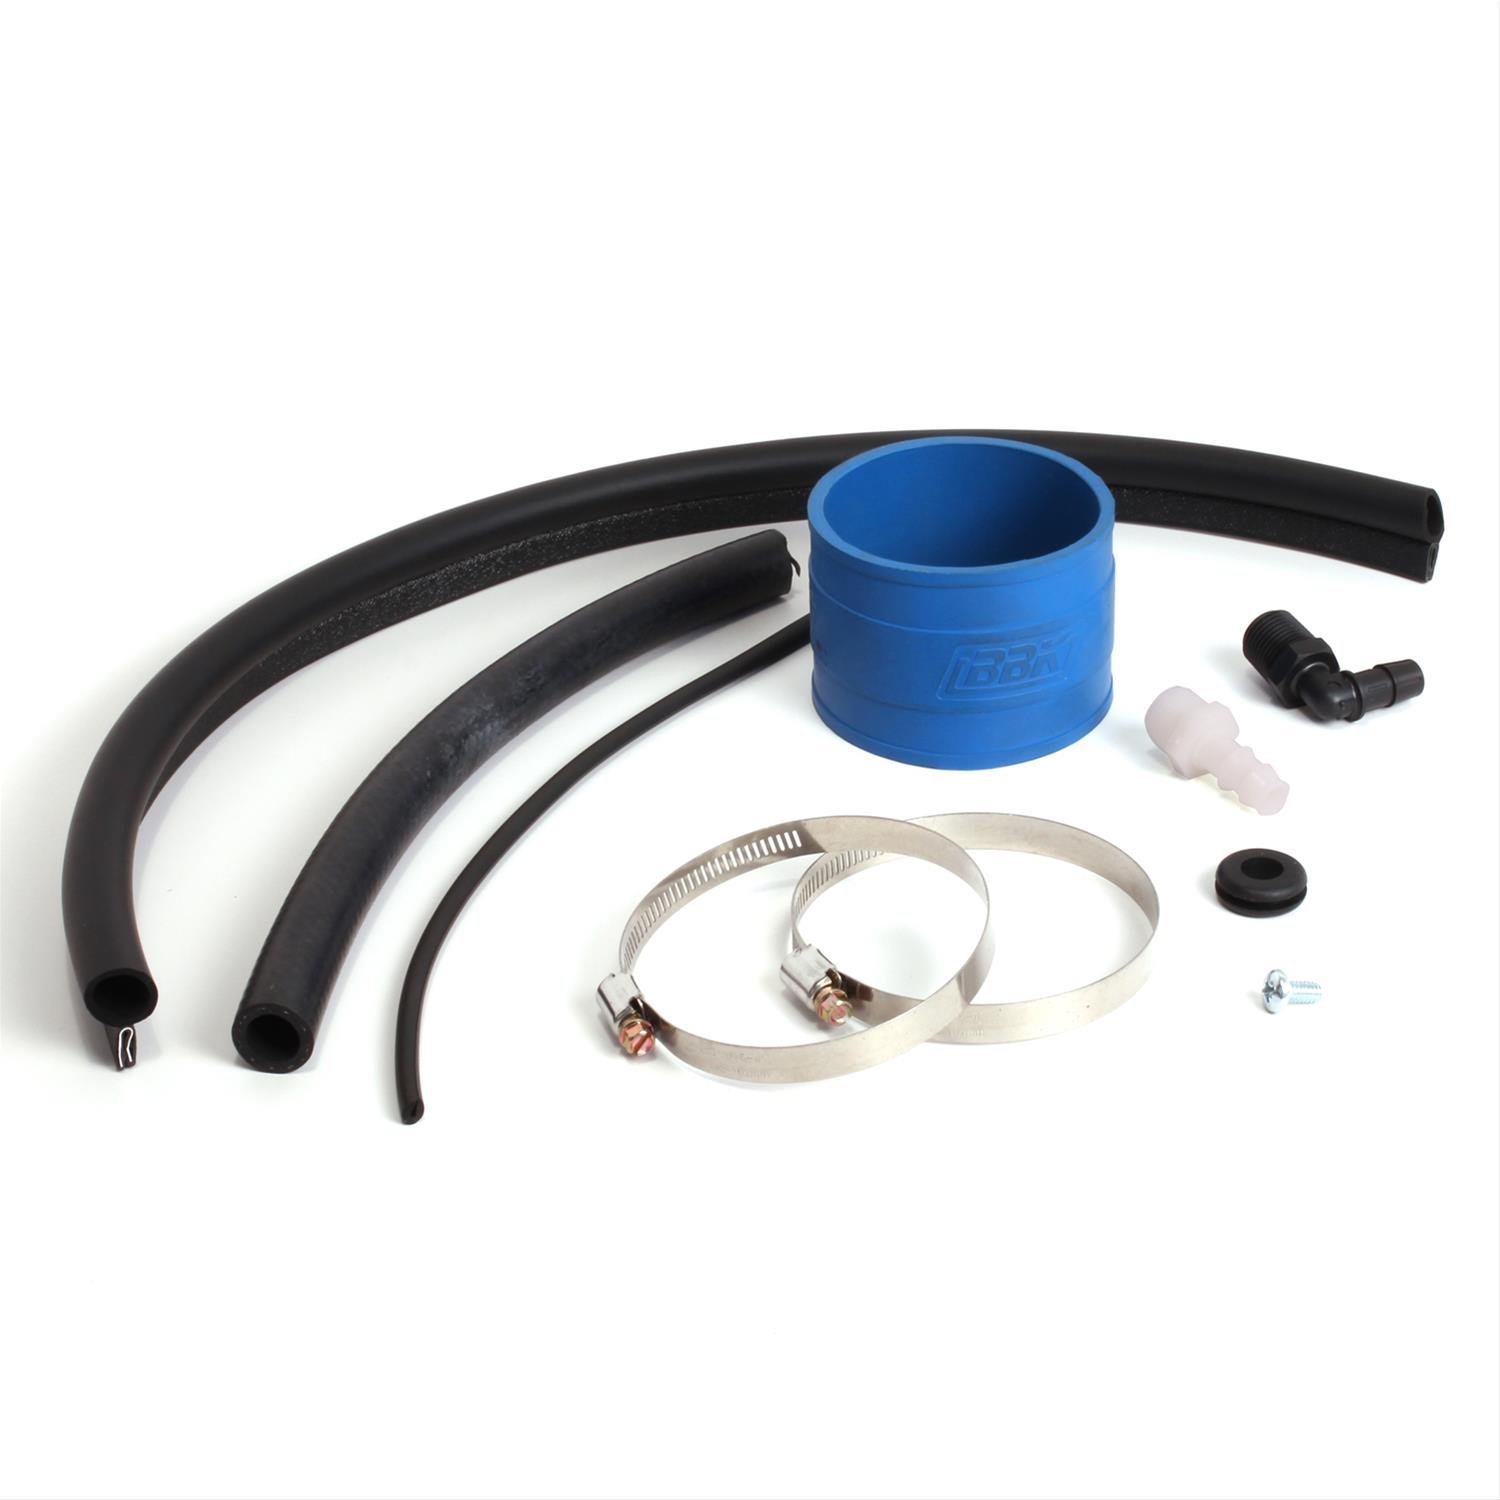 Cold Air Intake Replacement Hose, Clamp and Hardware Kit 2005-14 Mopar Challenger, Charger, Magnum, 300 Hemi 5.7/6.1L